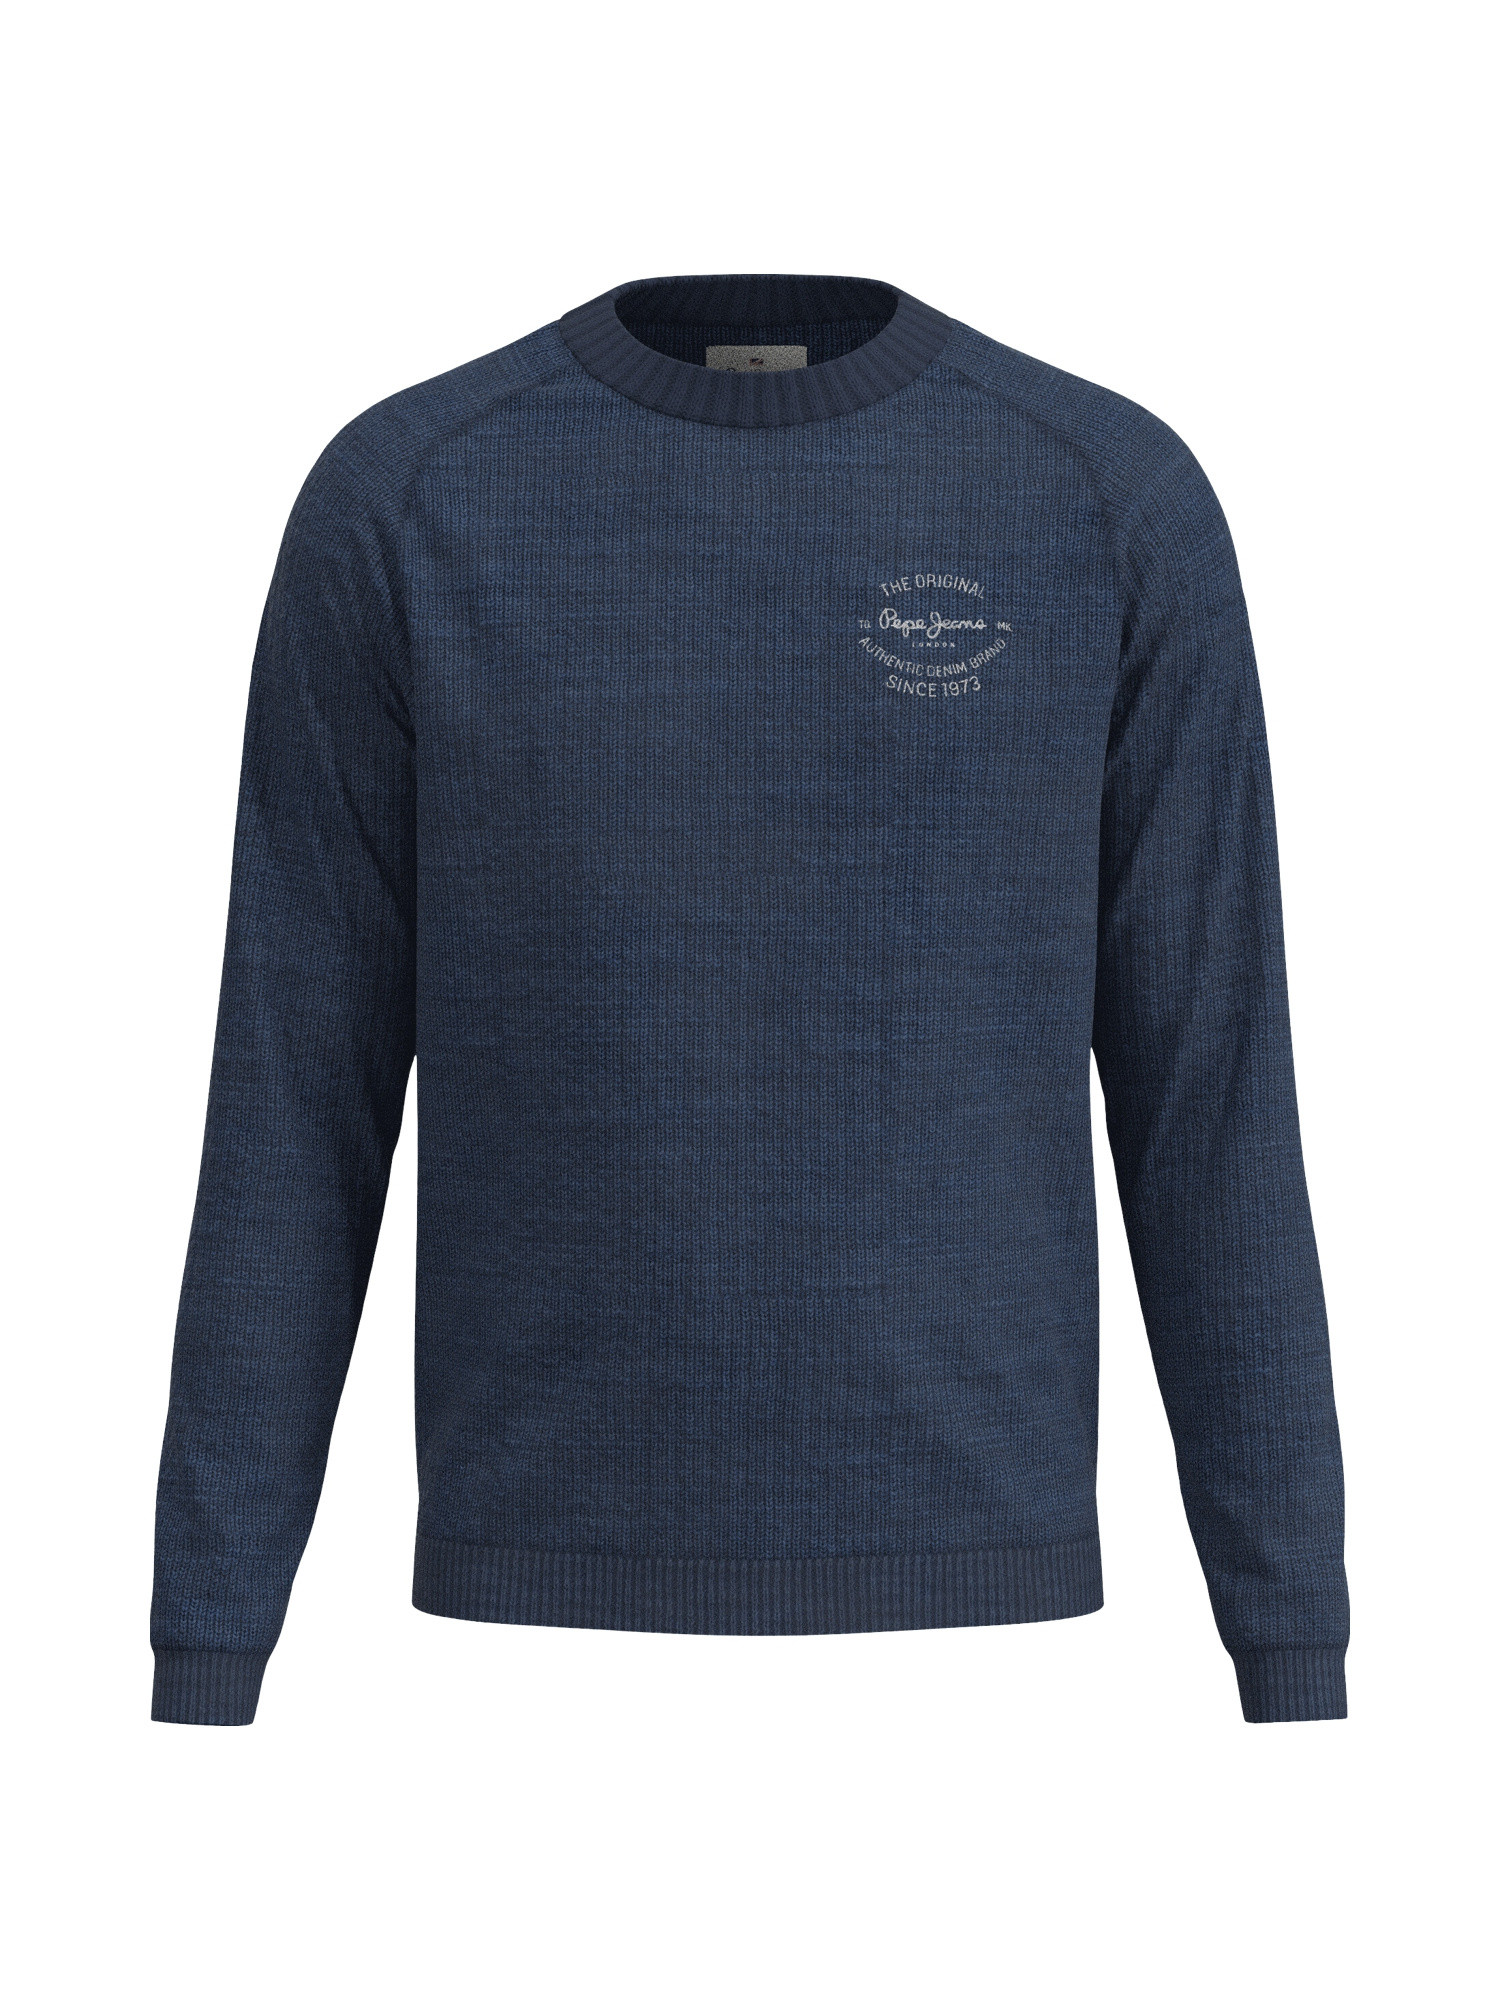 Pepe Jeans - Pullover con logo in cotone, Blu scuro, large image number 0